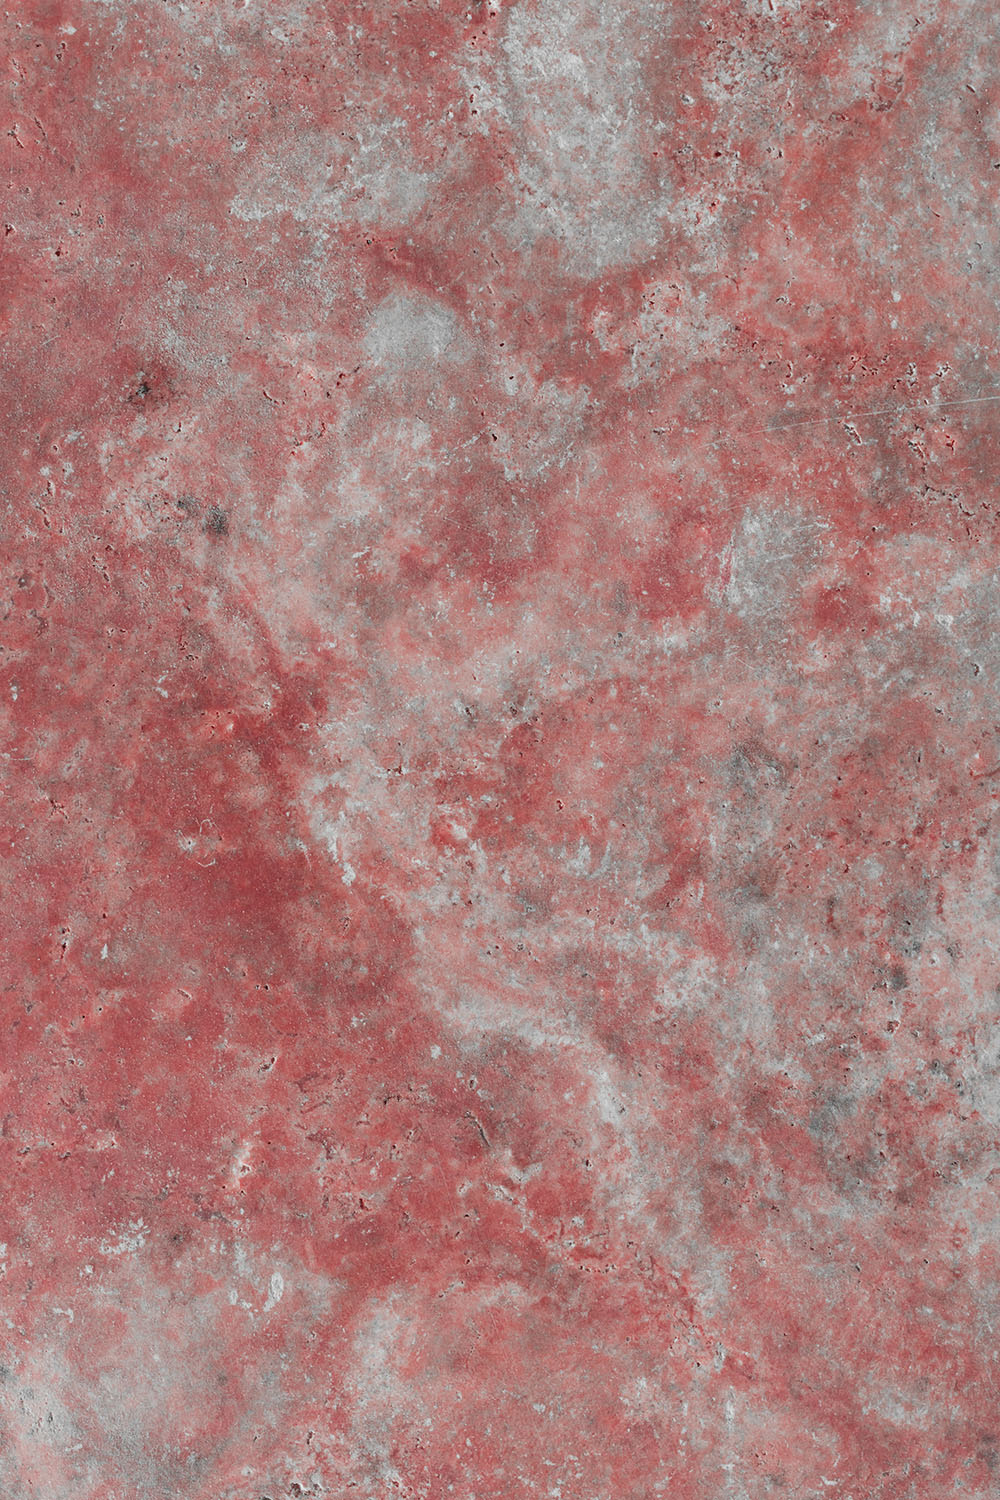 Salty red stone photo backdrop, for food and product photographers